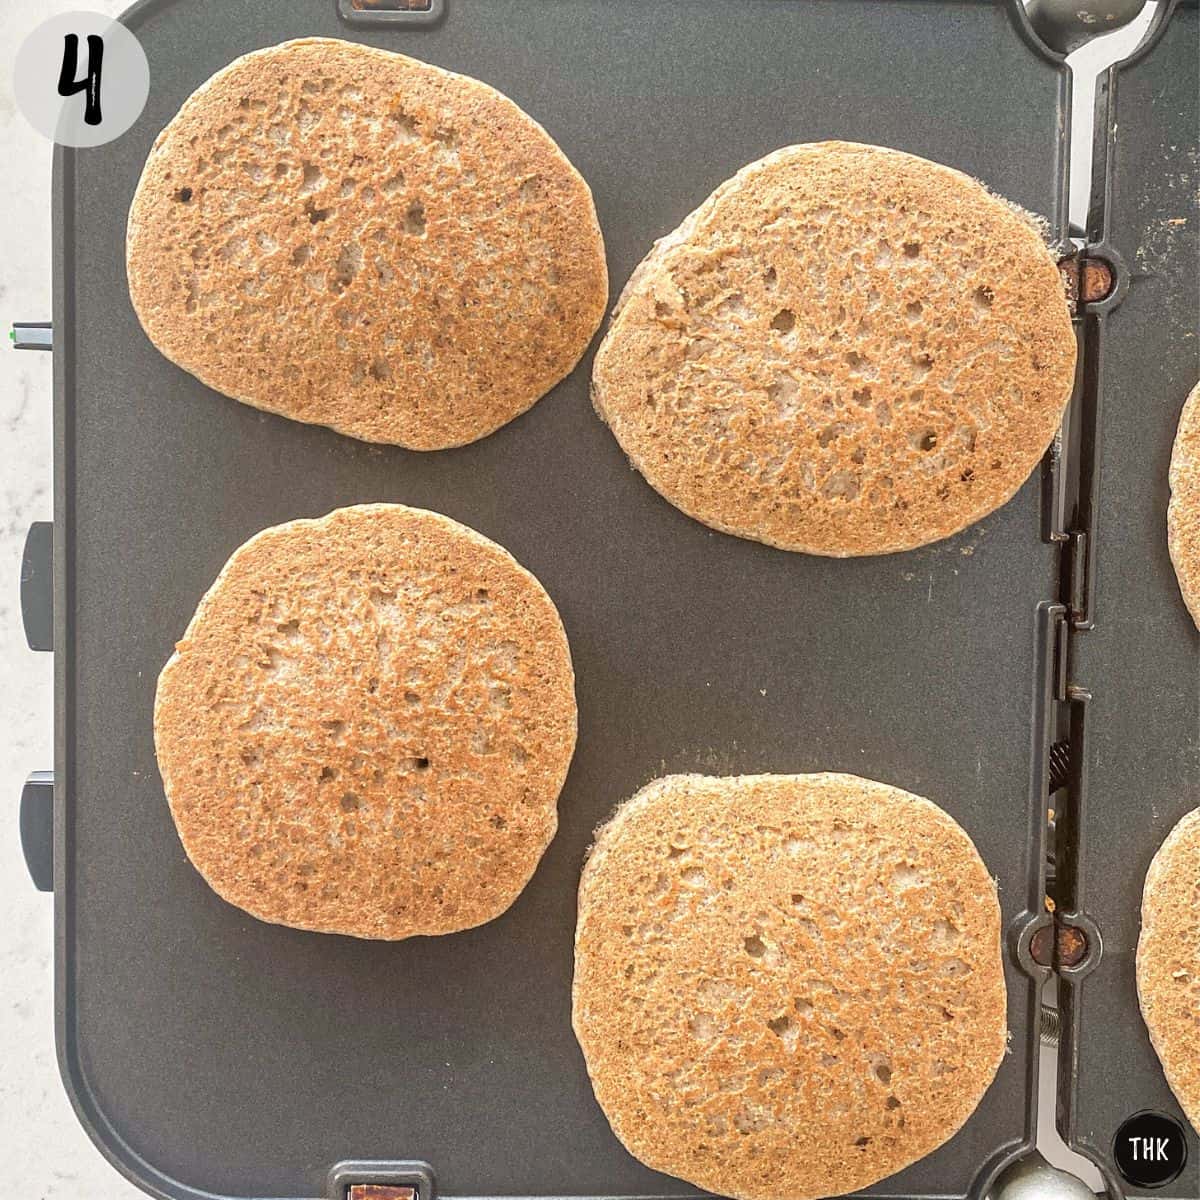 Pancakes being cooked on griddle.